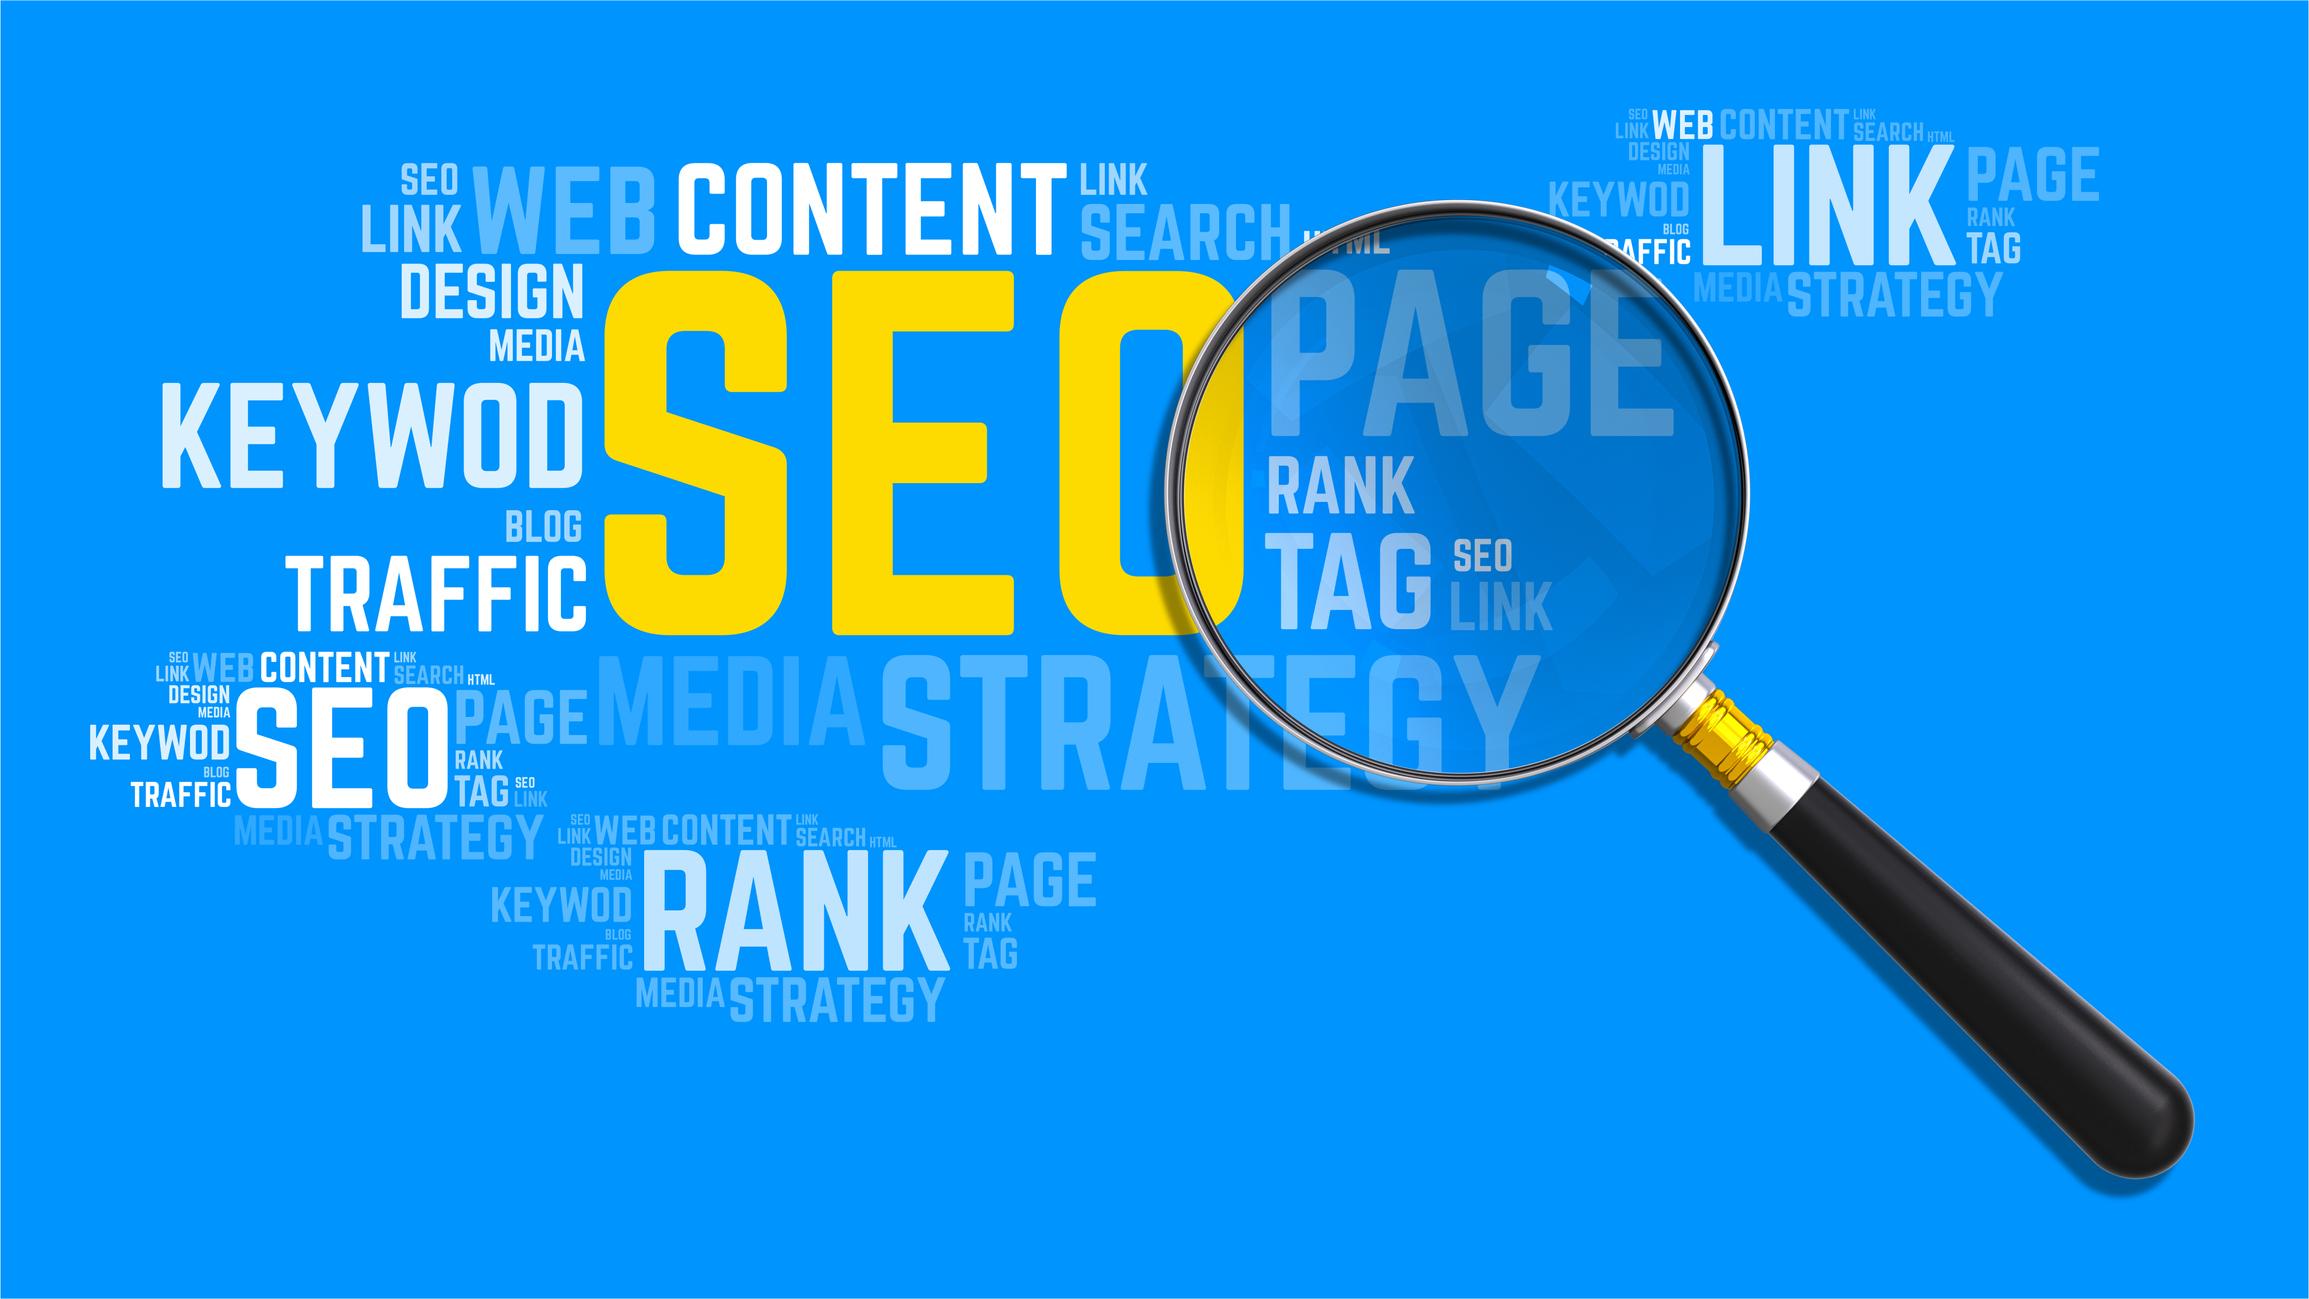 Don't Get Lost in the Google Fog! 5 Tips for UK Businesses to Master SEO